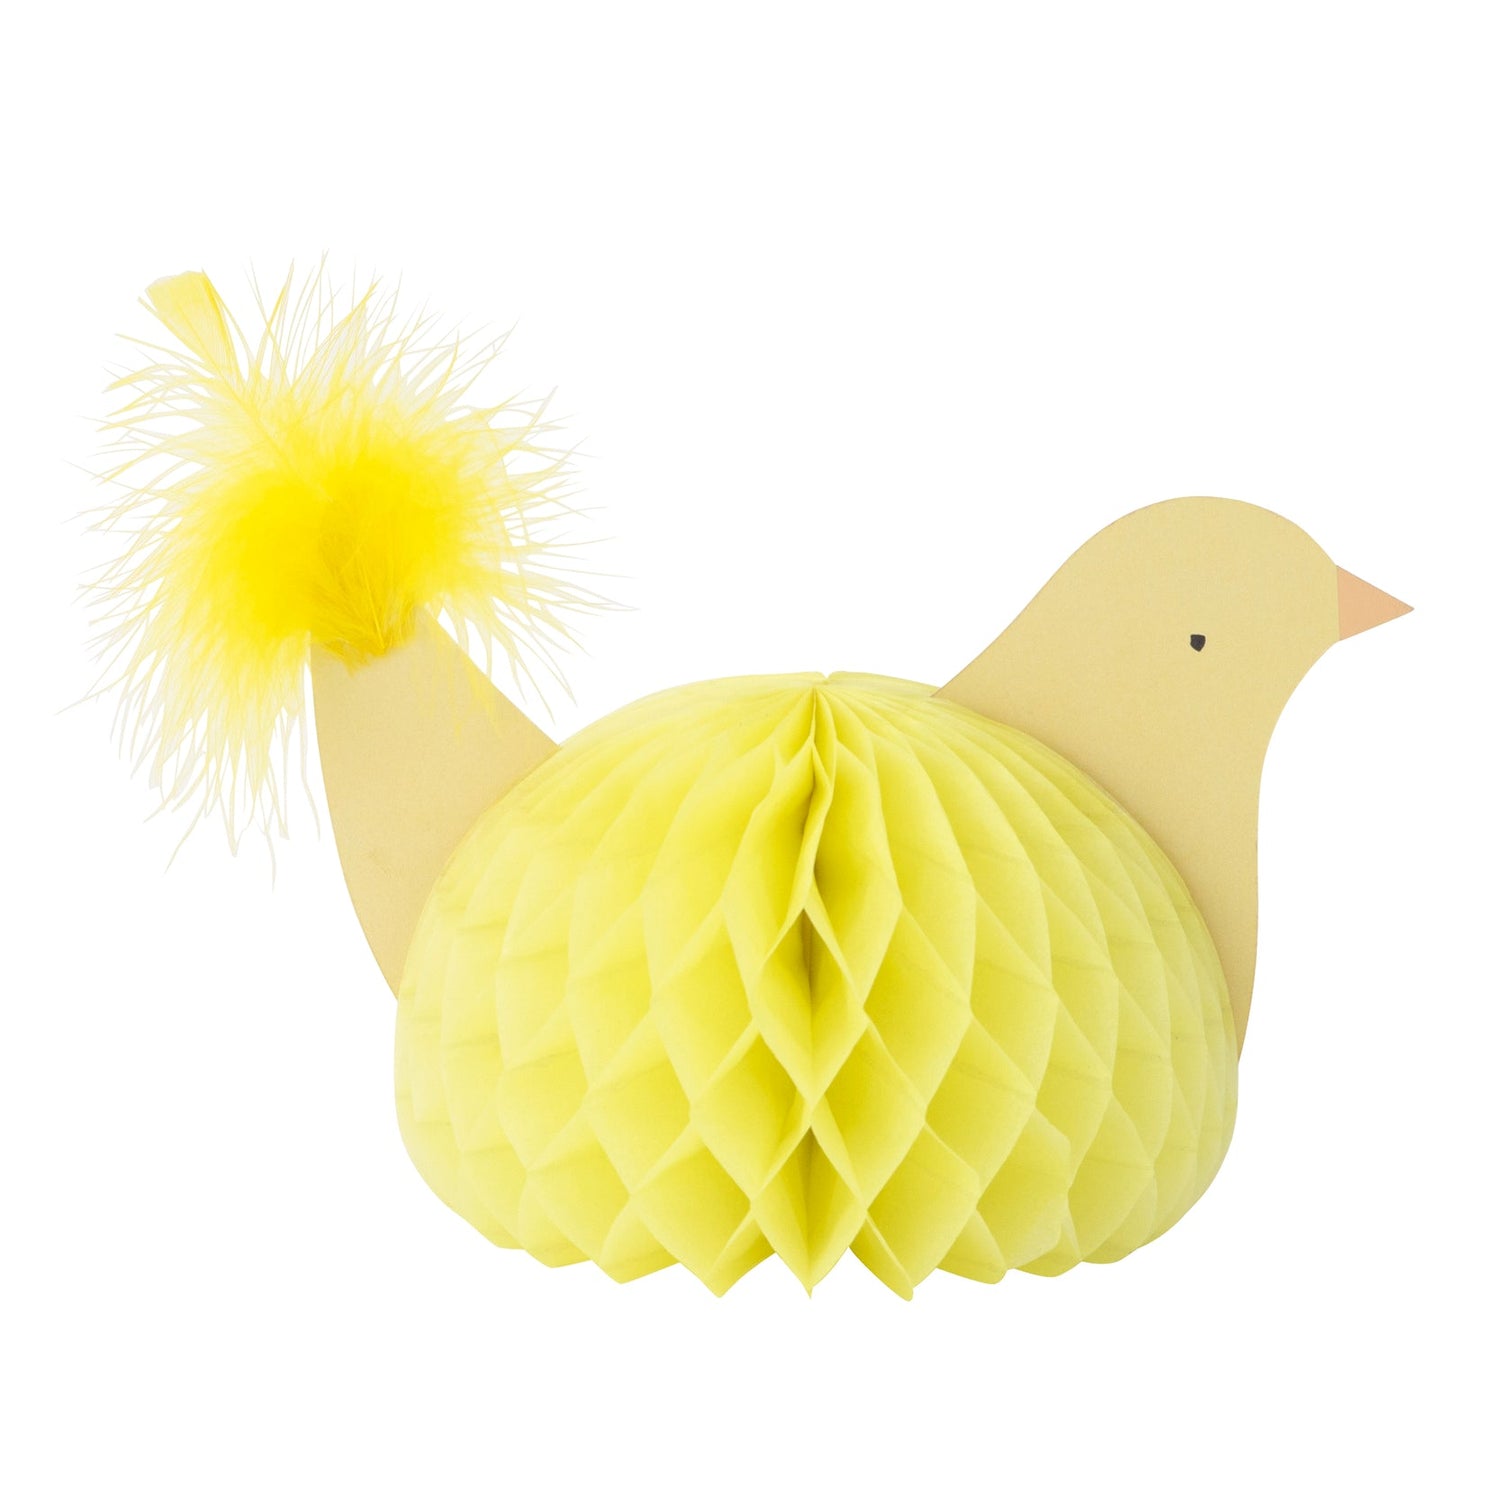 A yellow bird with feathers perched on top of a yellow flower, serving as an eye-catching Meri Meri Easter Honeycomb Decorations decoration for the party table.